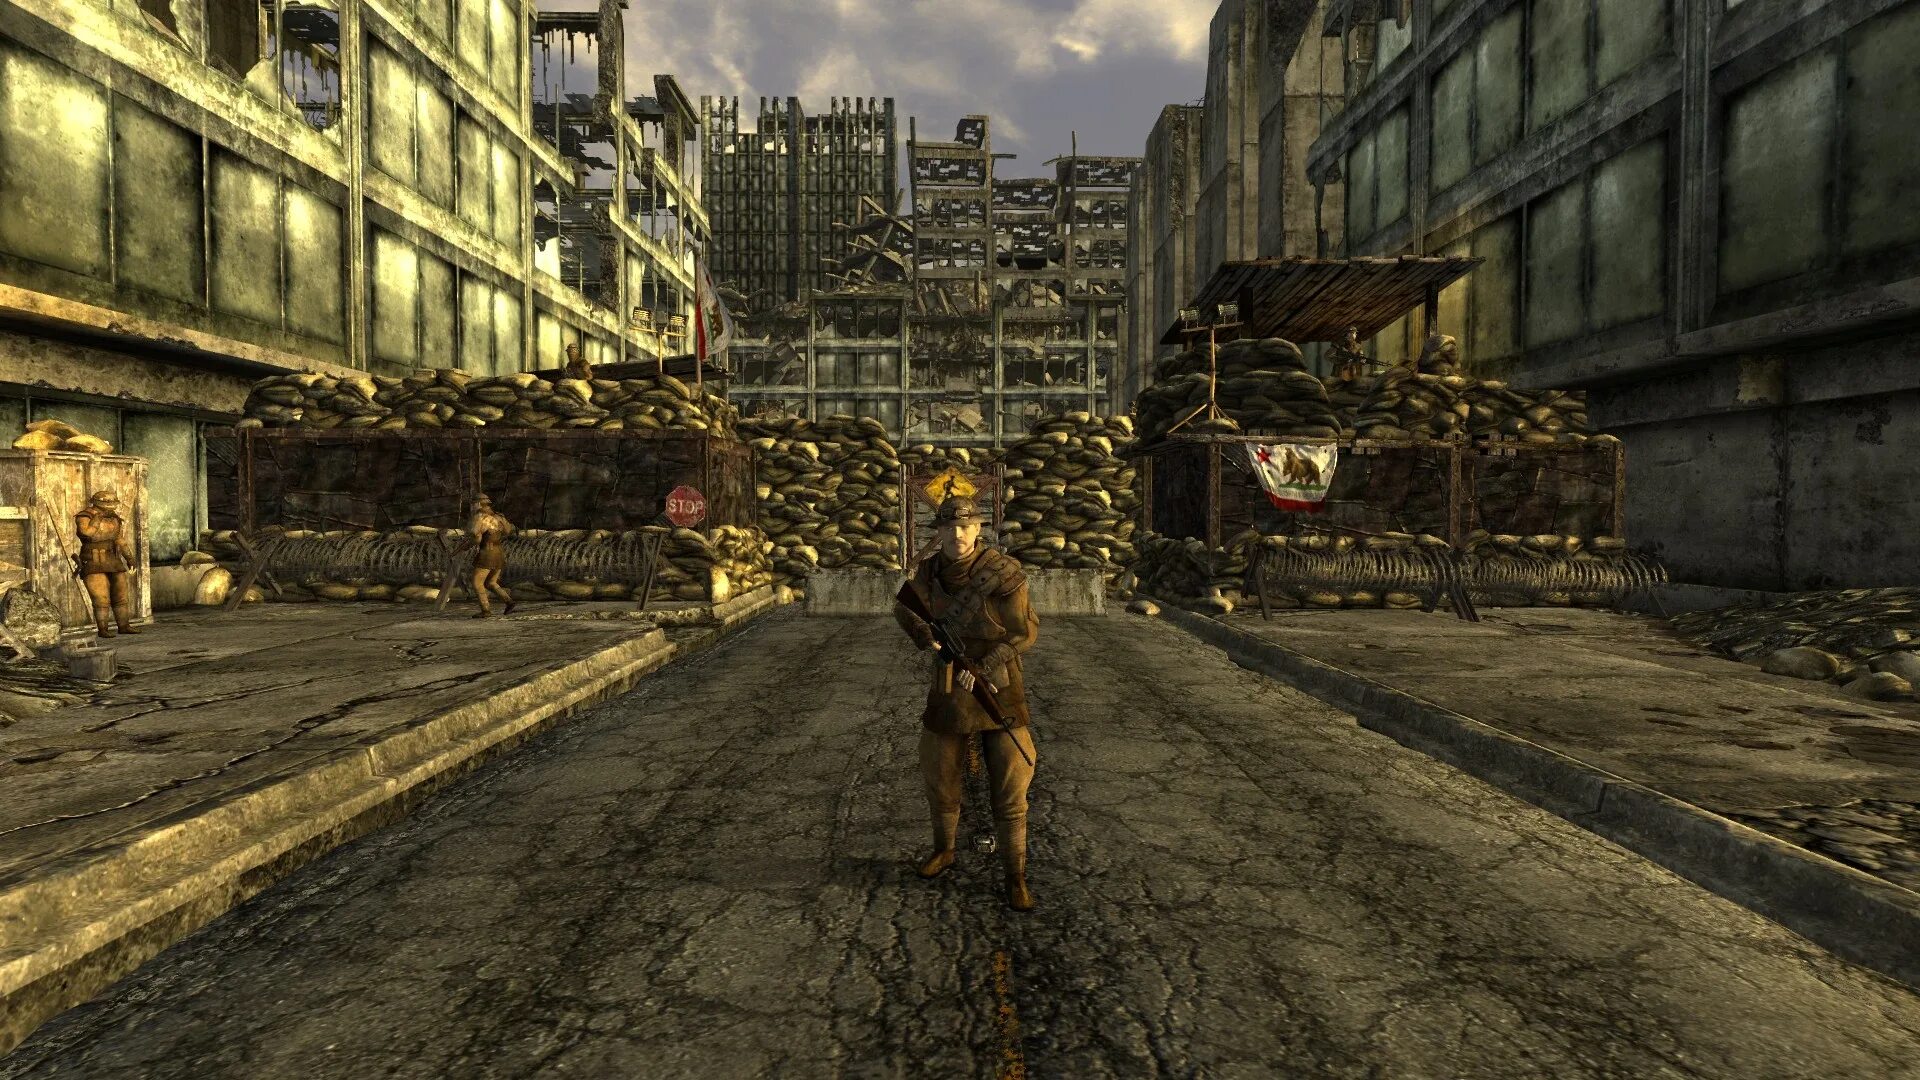 Fallout new vegas windows 10. Фоллаут город. Большой город Fallout 3. Fallout NCR City. Фоллаут 3 город.